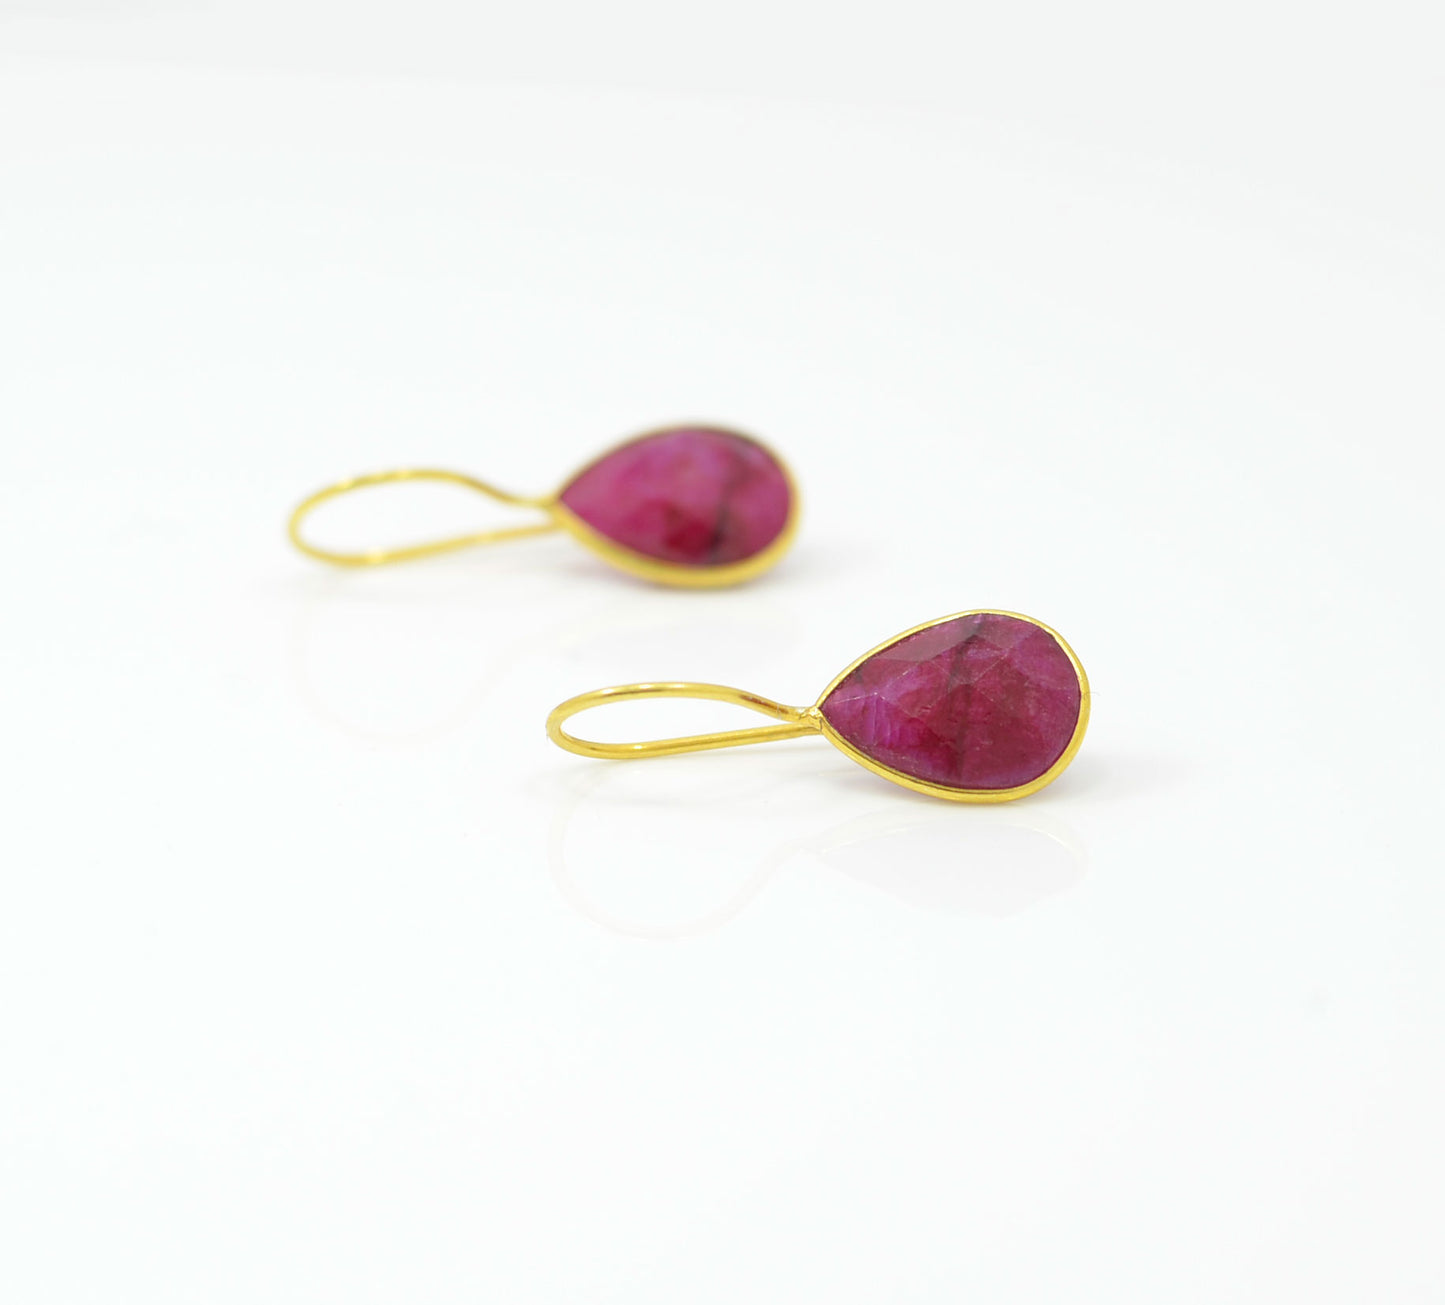 New Red Sillimanite Earrings representing love, peace, and prosperity